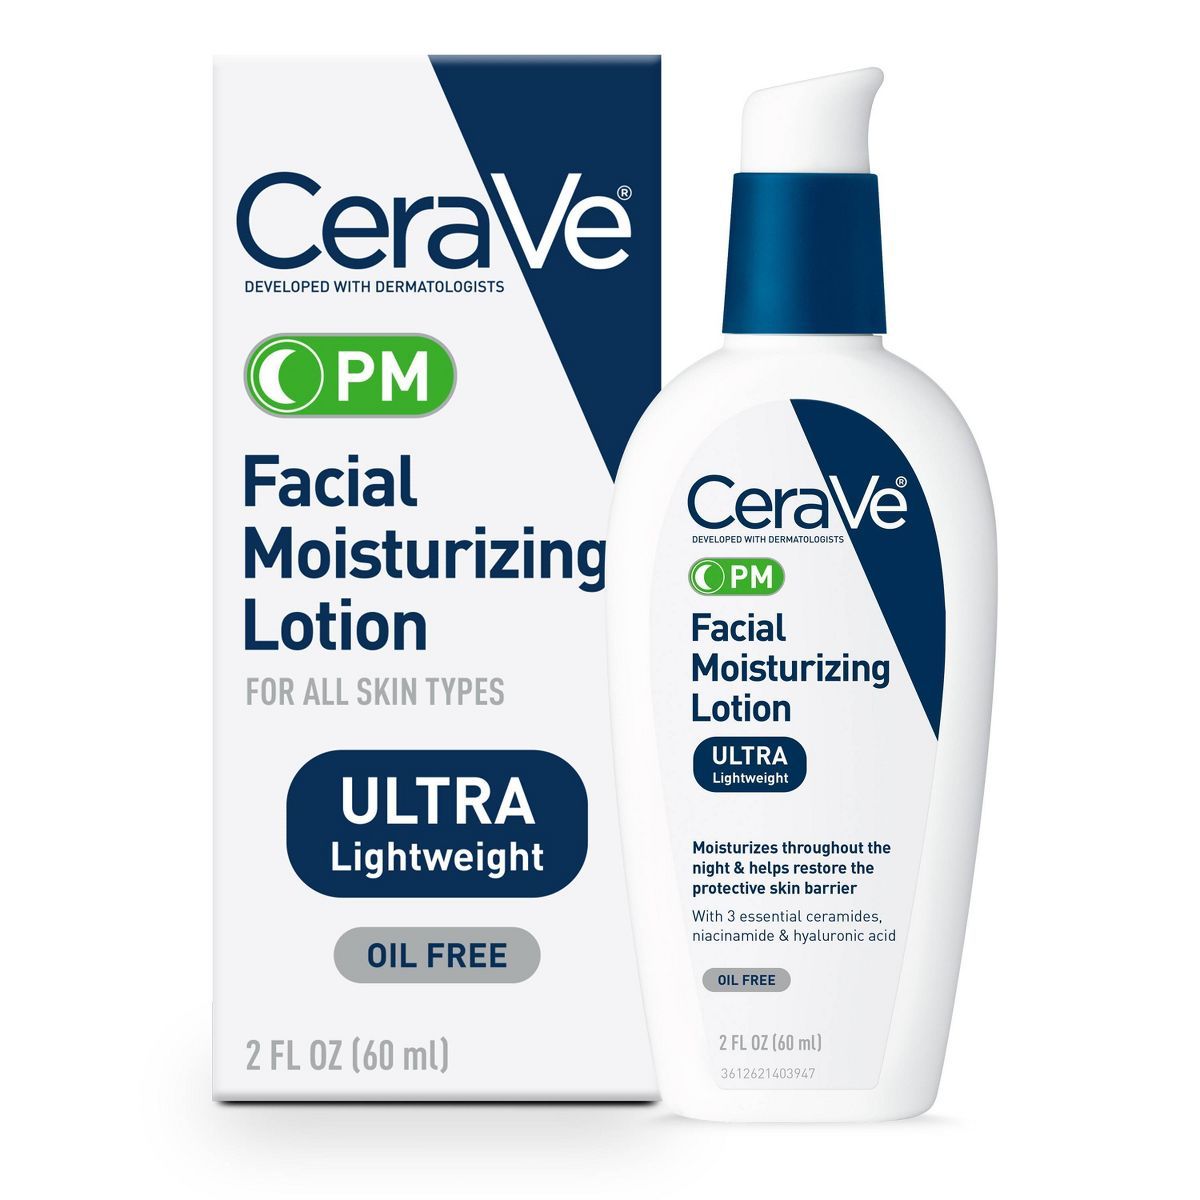 CeraVe PM Facial Moisturizing Lotion, Night Cream for All Skin Types | Target